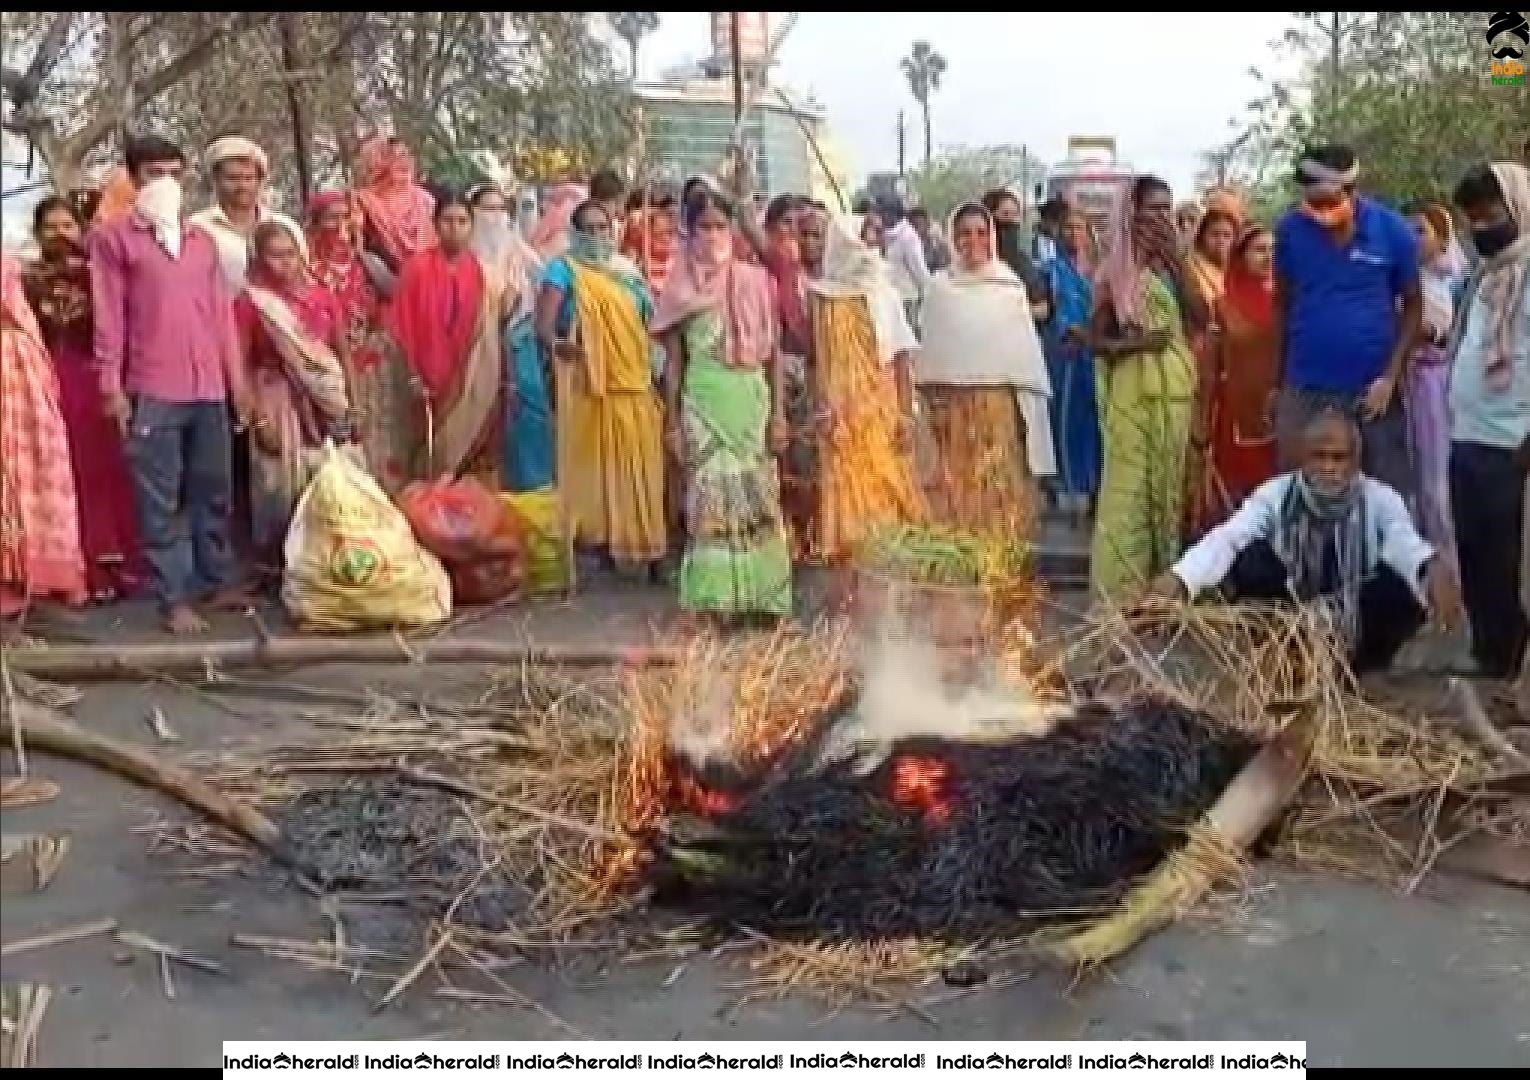 Vegetable farmers stage a protest in Bihar Sharif area due to Police harassment under the name of Corona Lockdown